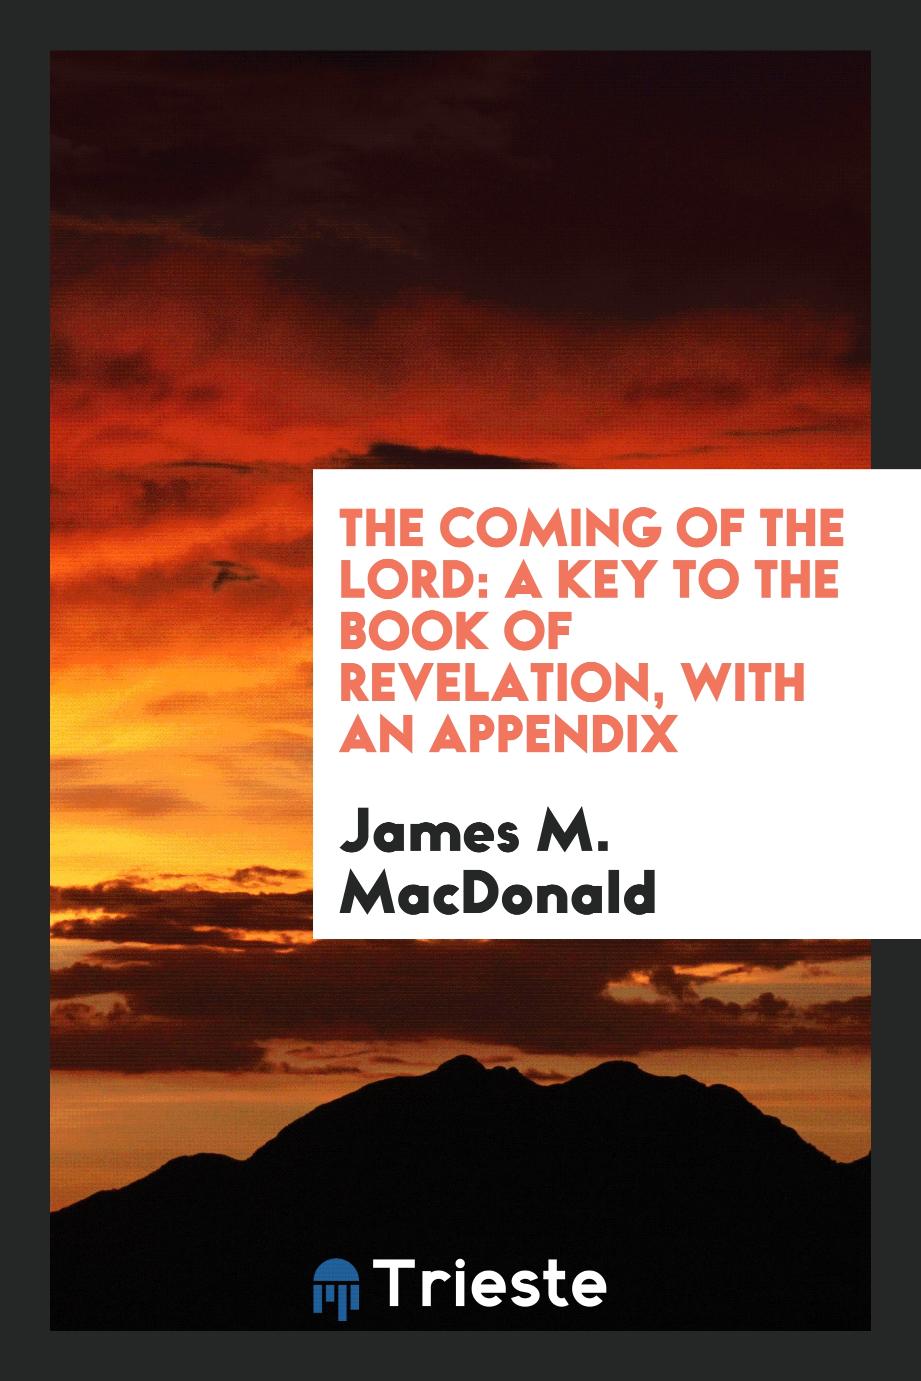 The coming of the Lord: a key to the book of Revelation, with an appendix